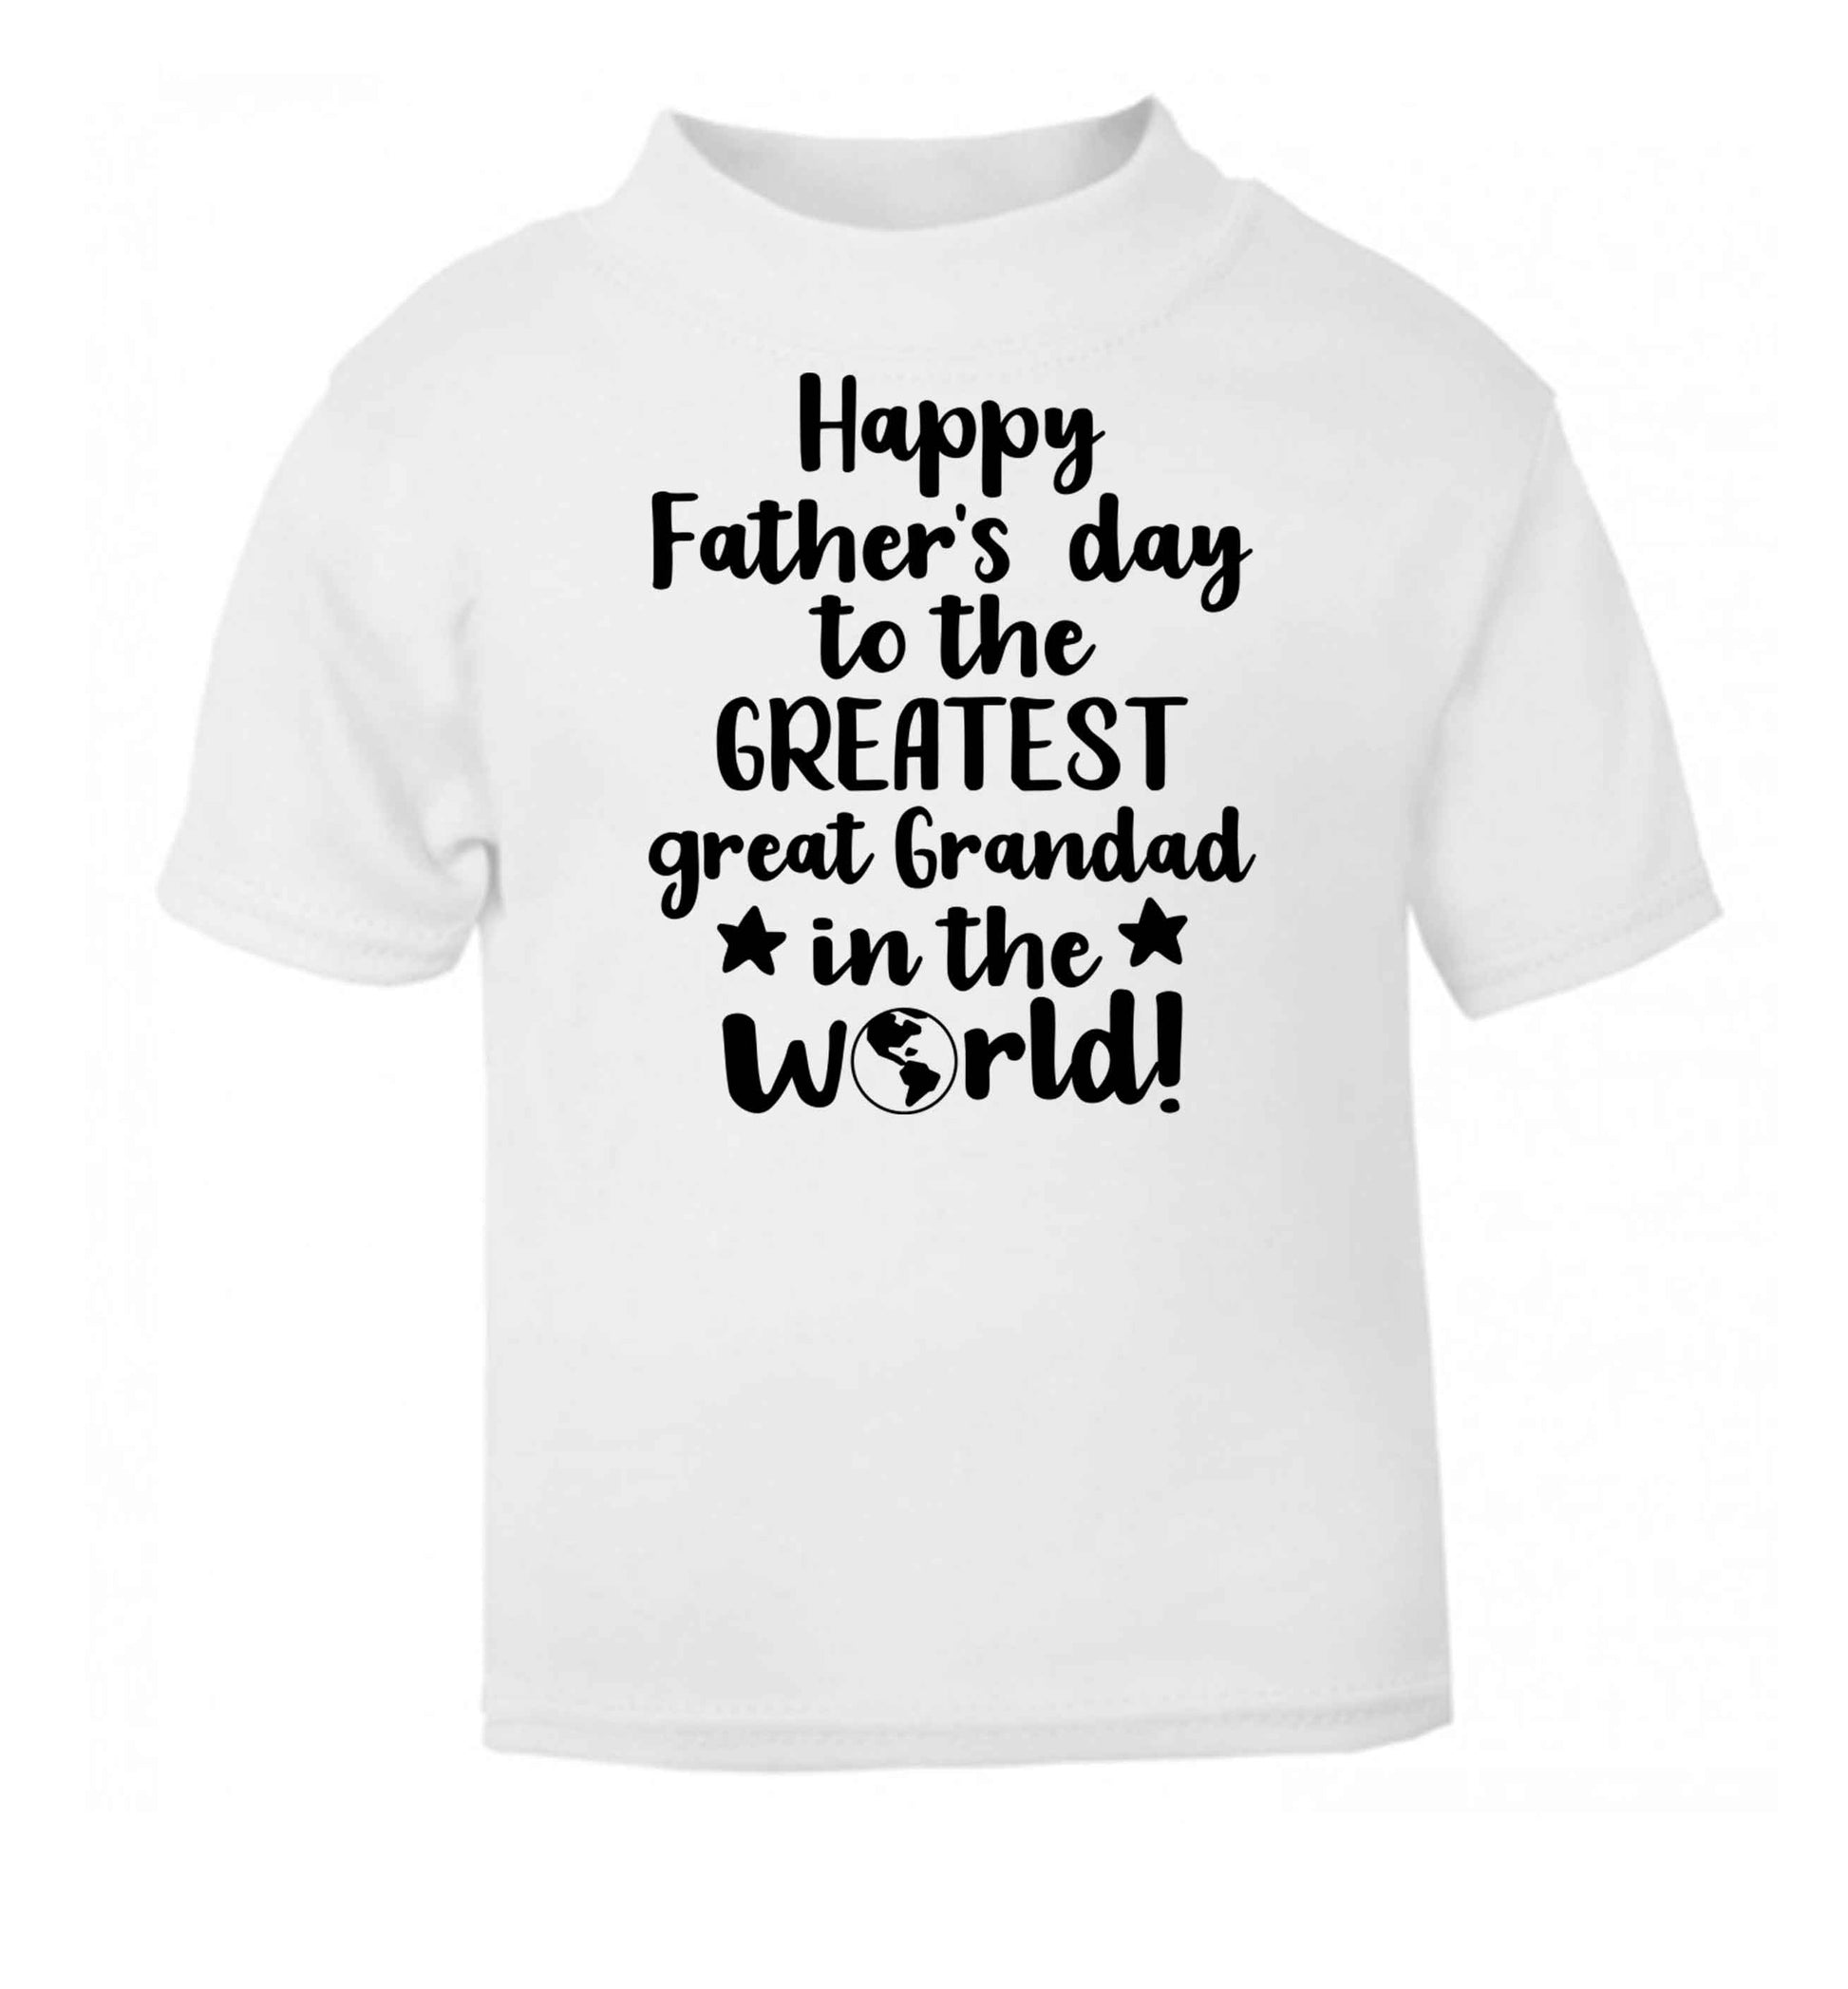 Happy Father's day to the greatest great grandad in the world white baby toddler Tshirt 2 Years